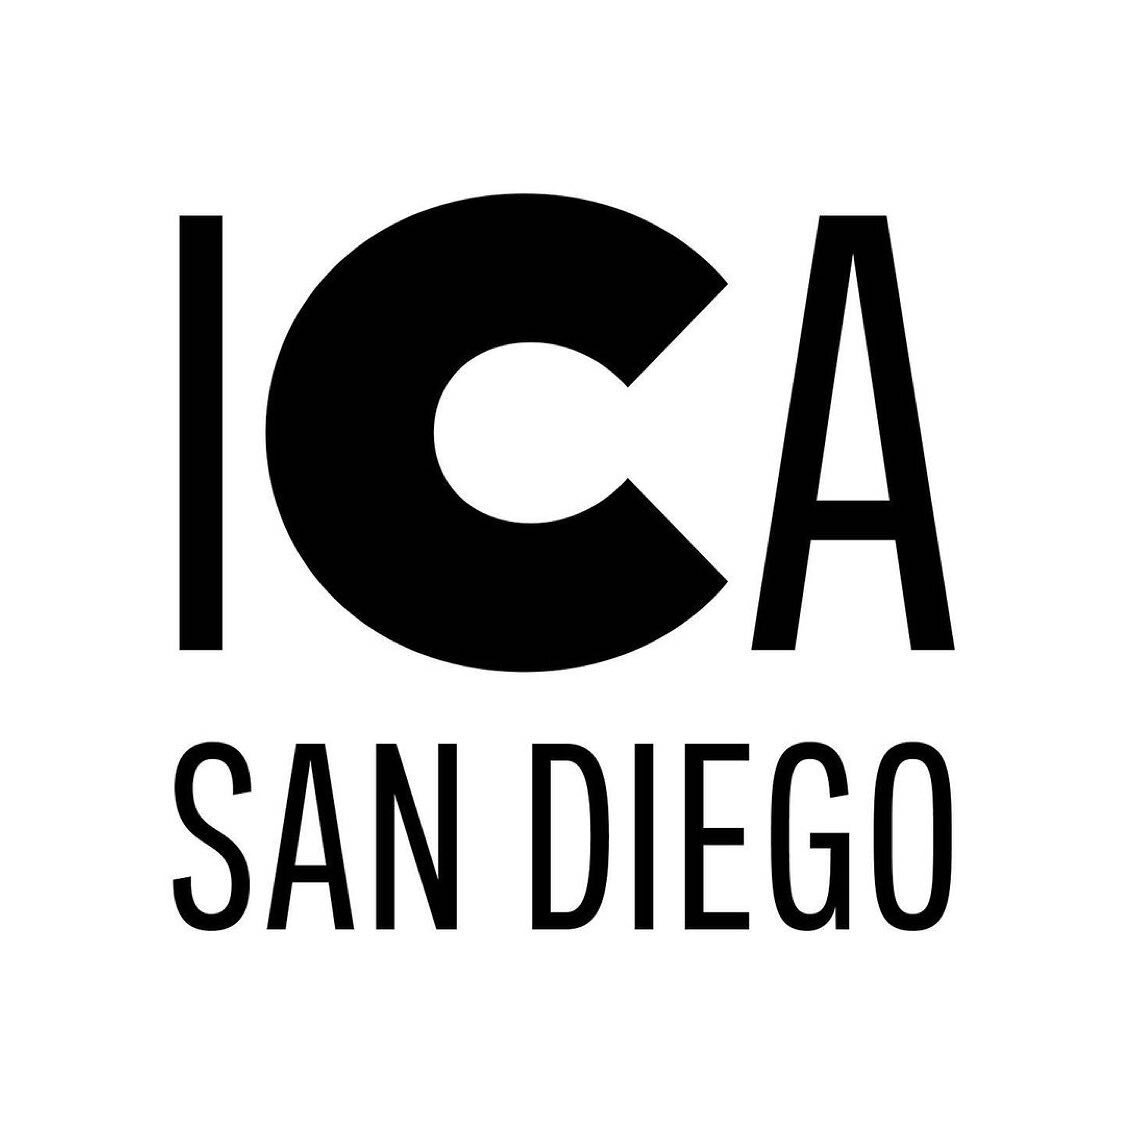 Breaking news! The San Diego Art Institute is merging with Lux Art Institute to become The Institute of Contemporary Art, San Diego.

@icasandiego.

Read an exclusive interview from @sandiegouniontribune with Andrew Utt (@andrewutt), the new founding